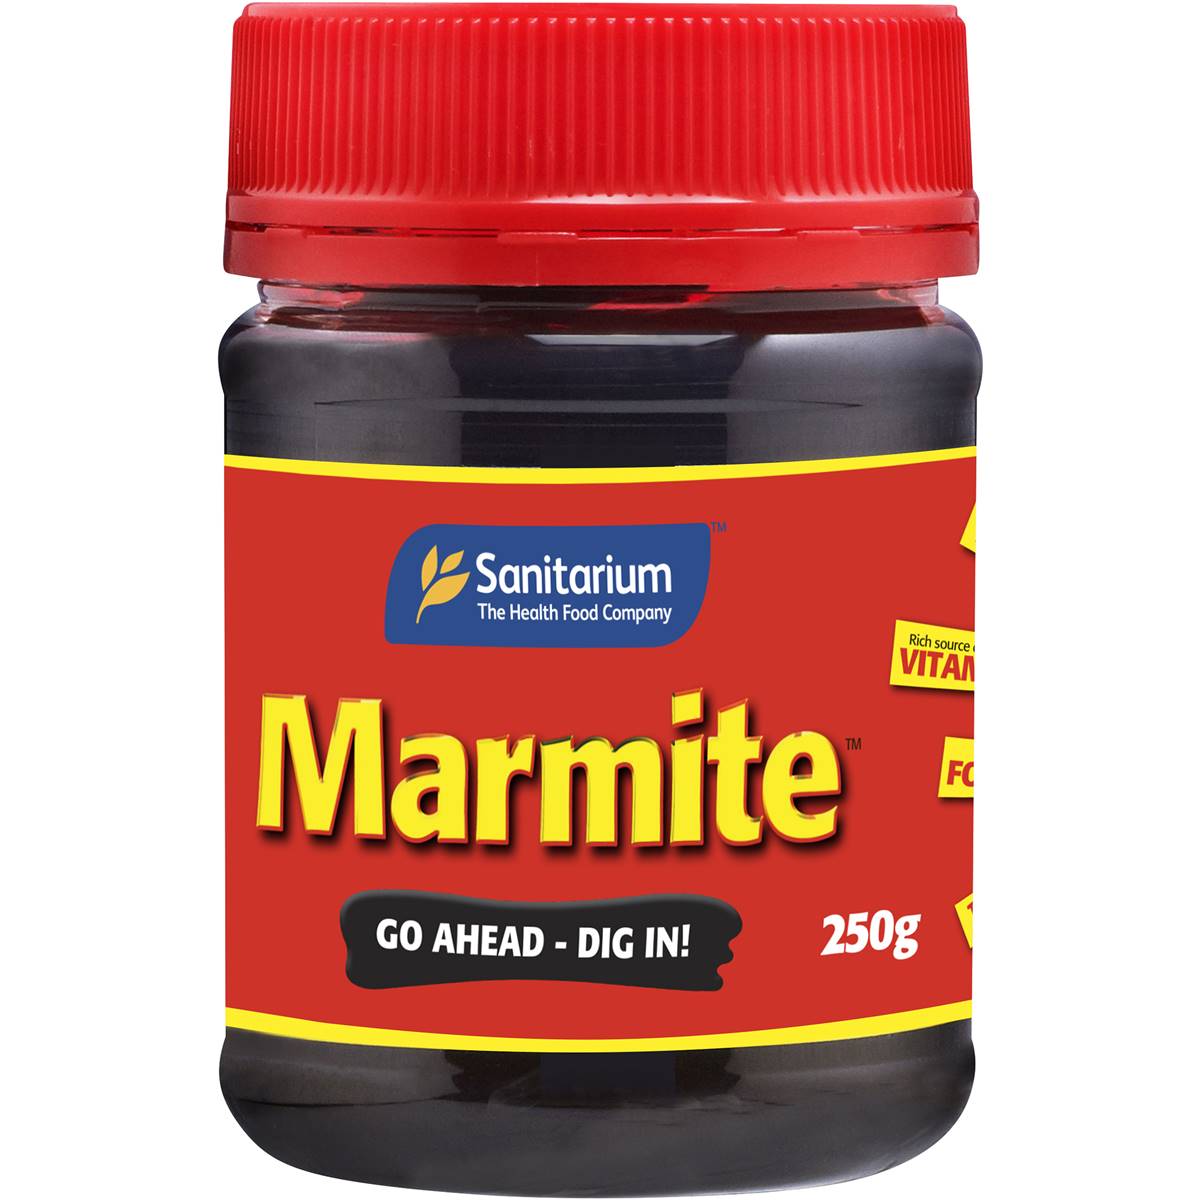 Marmite low calorie toast topping